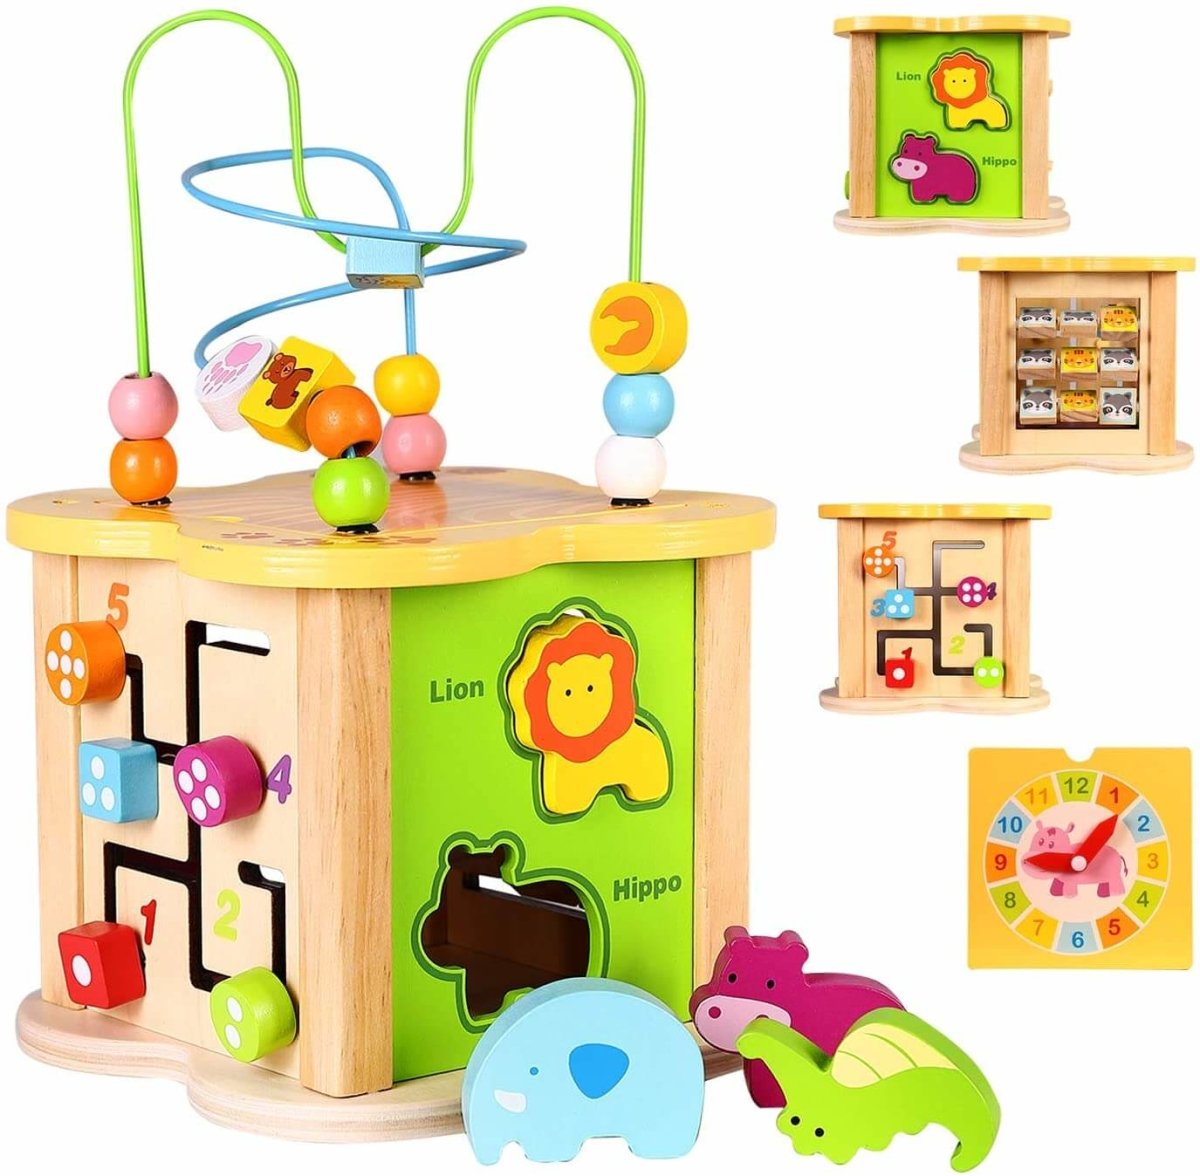 Best Seller: 6-in-1 Activity Cube